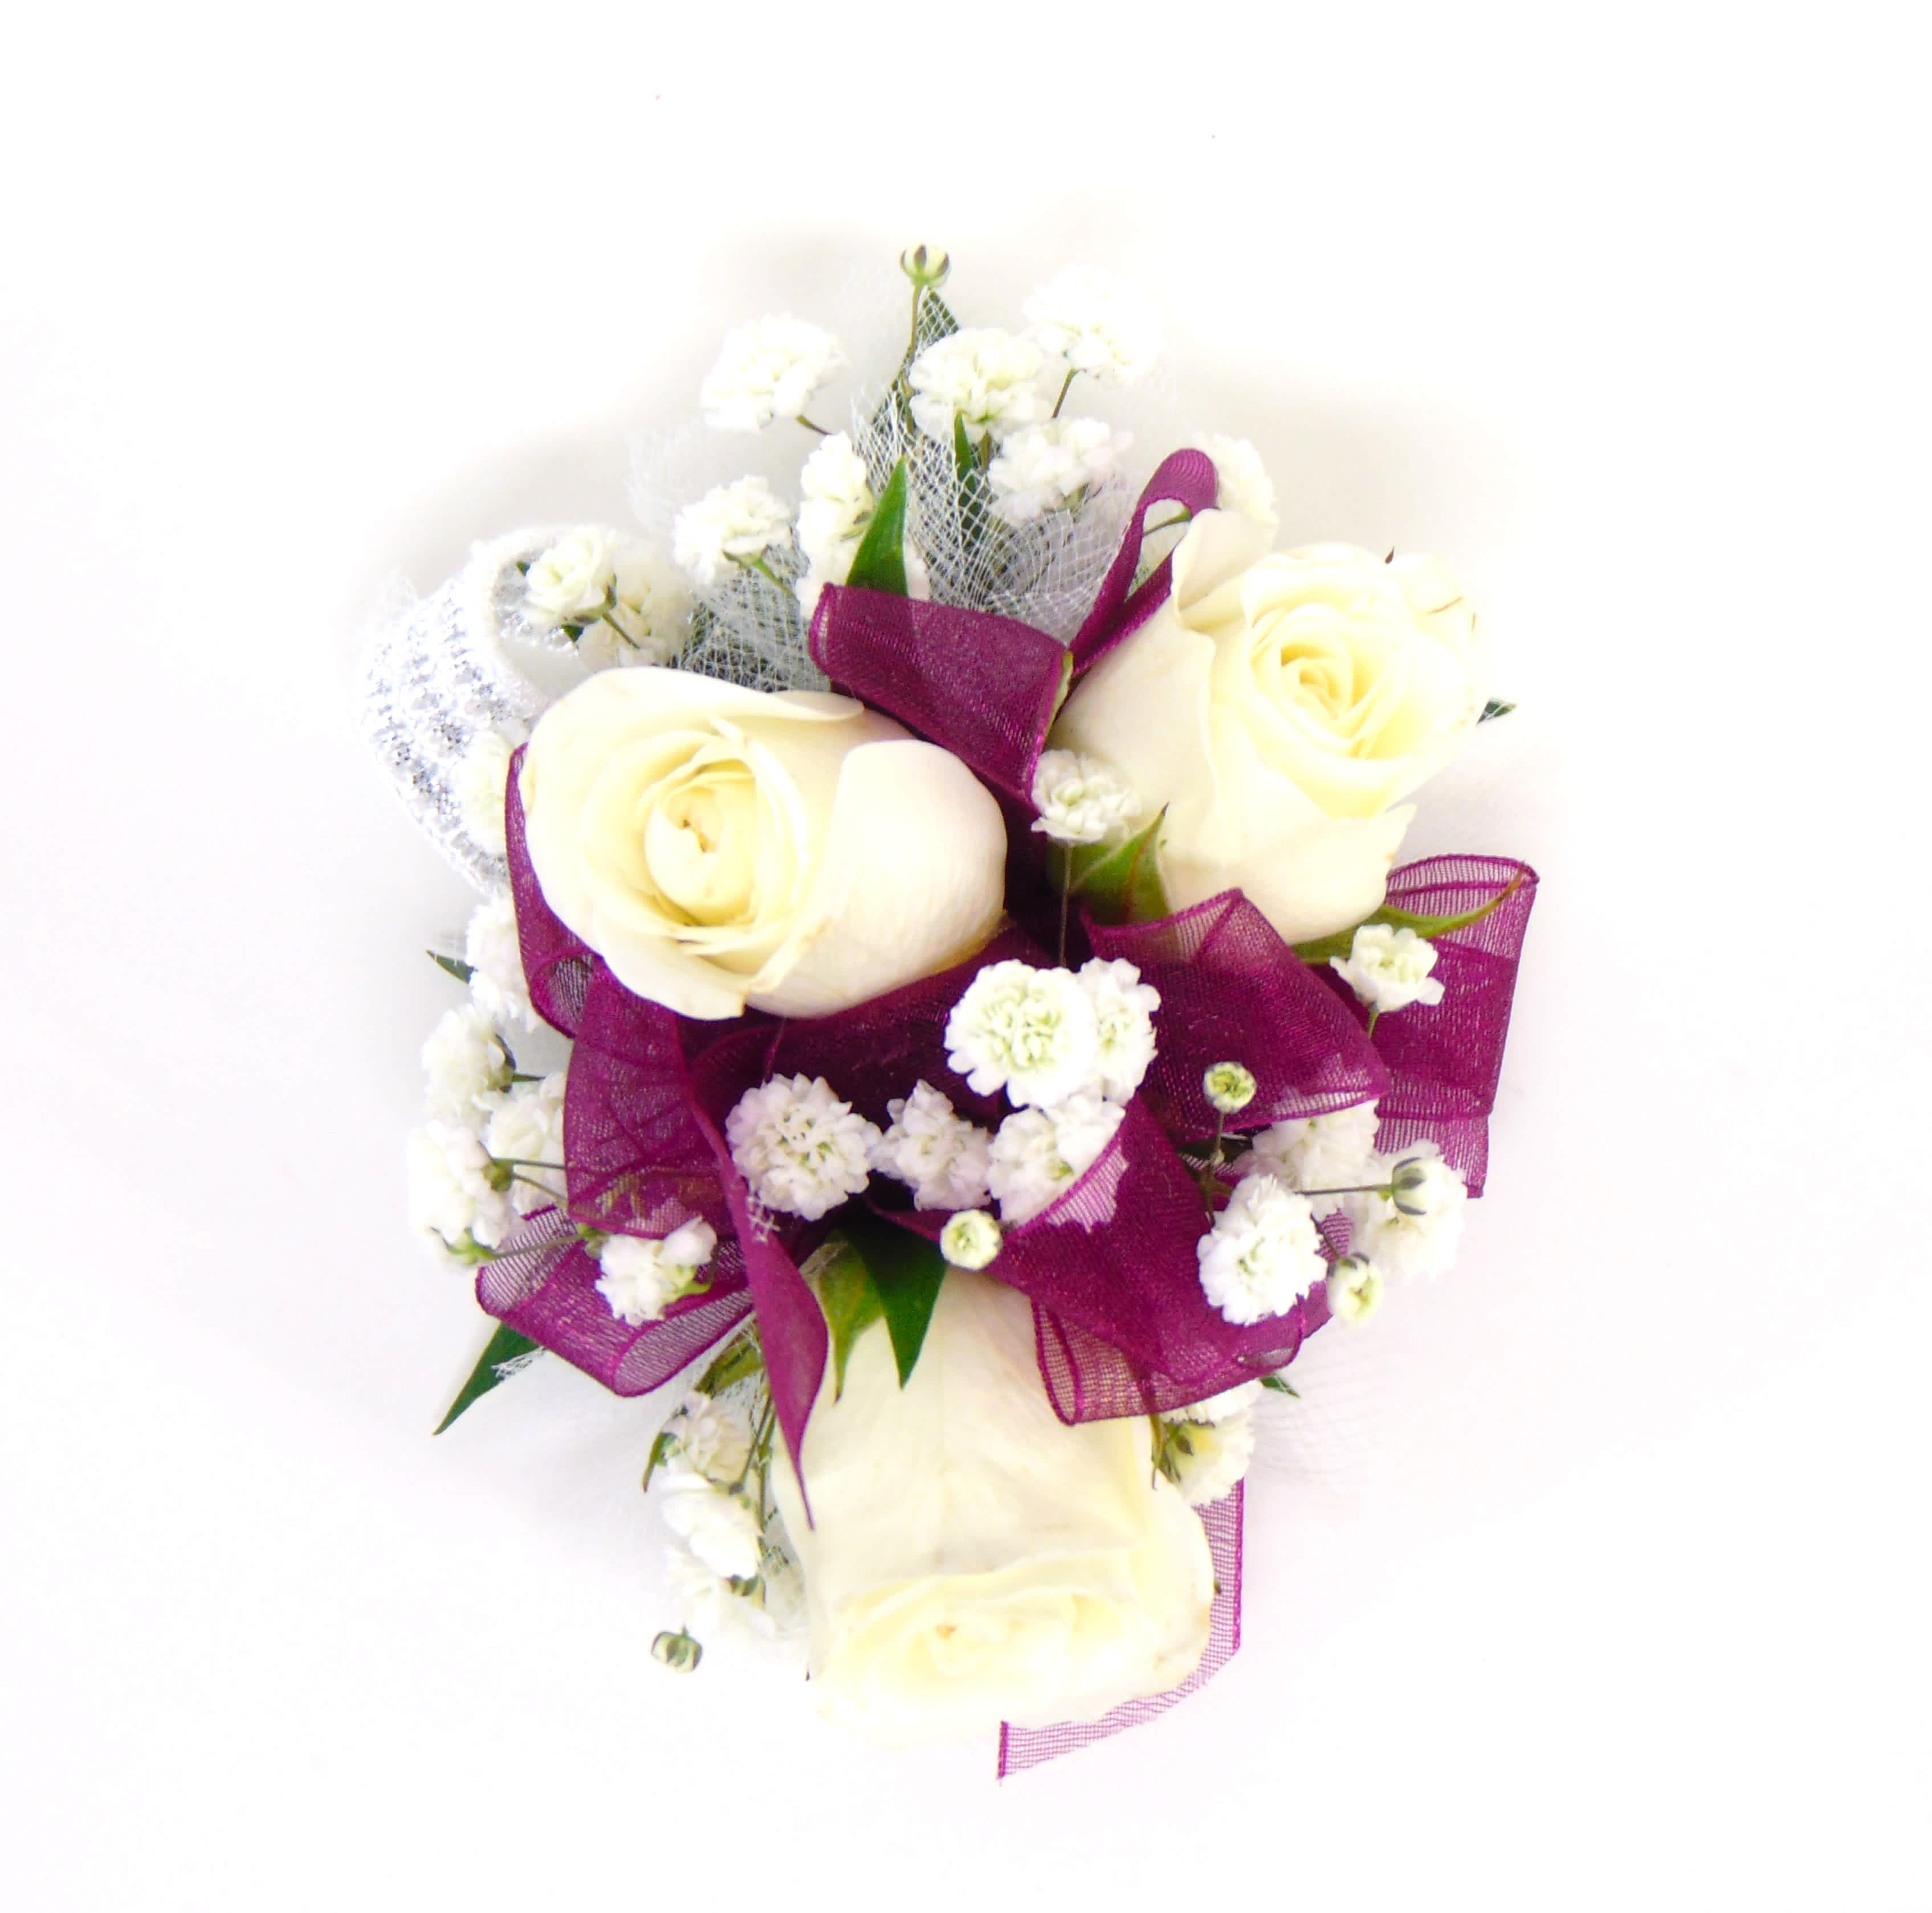 White Spray Rose Wrist Corsage with Plum Accents -  Three white spray roses, plum ribbonaby's breath, greens, white tulle on a standard wristlet. $39.99  Deluxe option adds bling. Premium option includes bling and  adds a beaded wristlet.  Includes corsage box. 